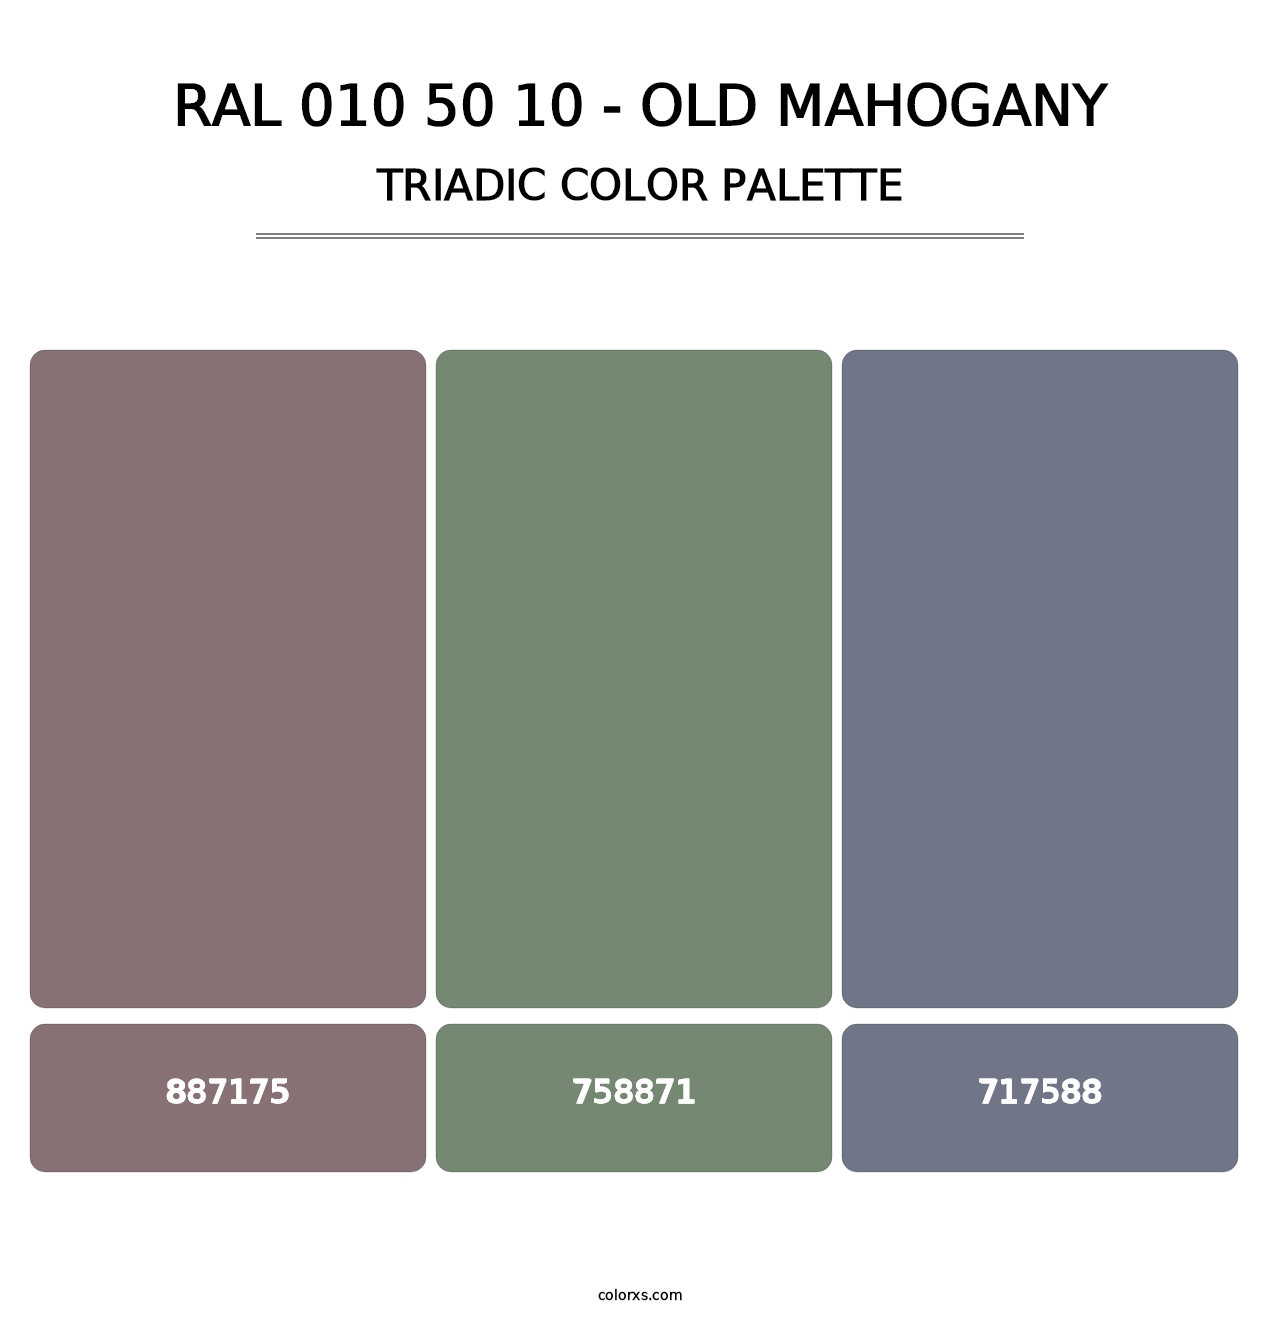 RAL 010 50 10 - Old Mahogany - Triadic Color Palette